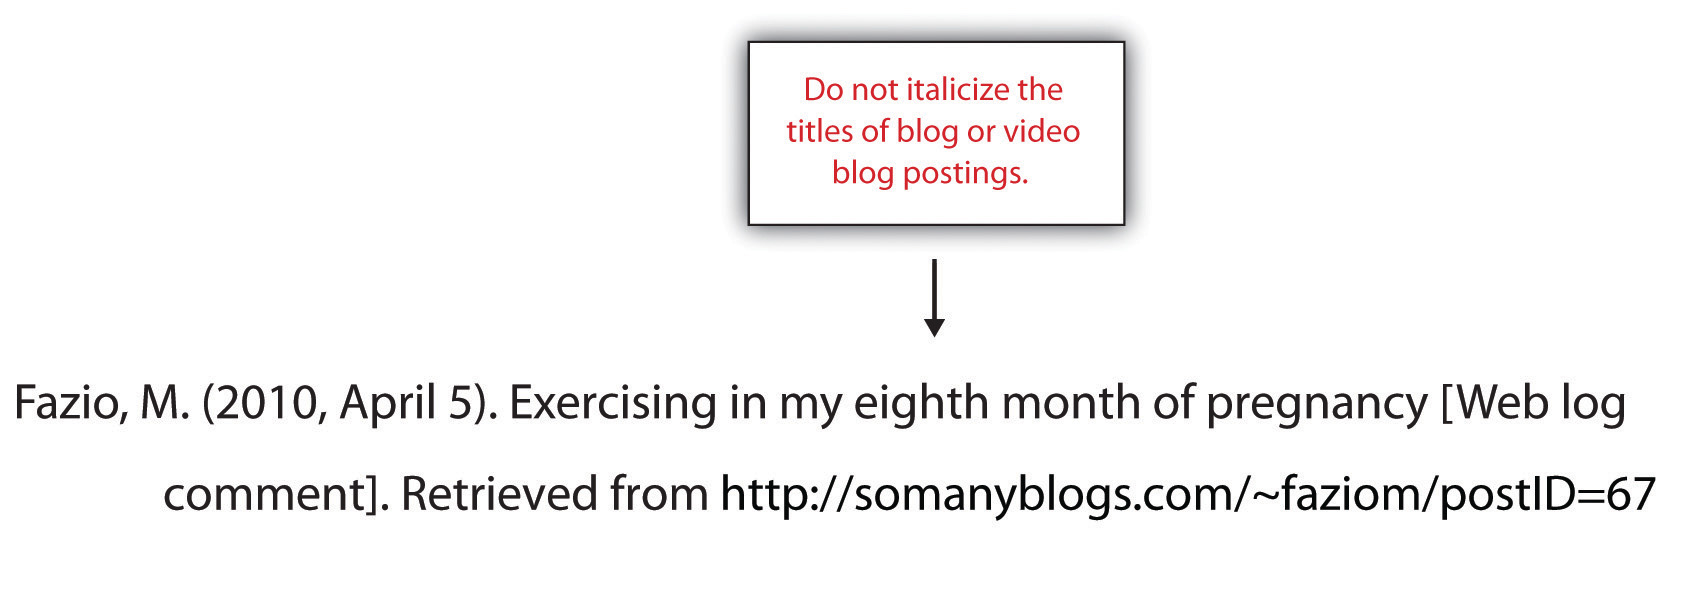 When creating a references section, do not italicize the titles of blog or video blog postings